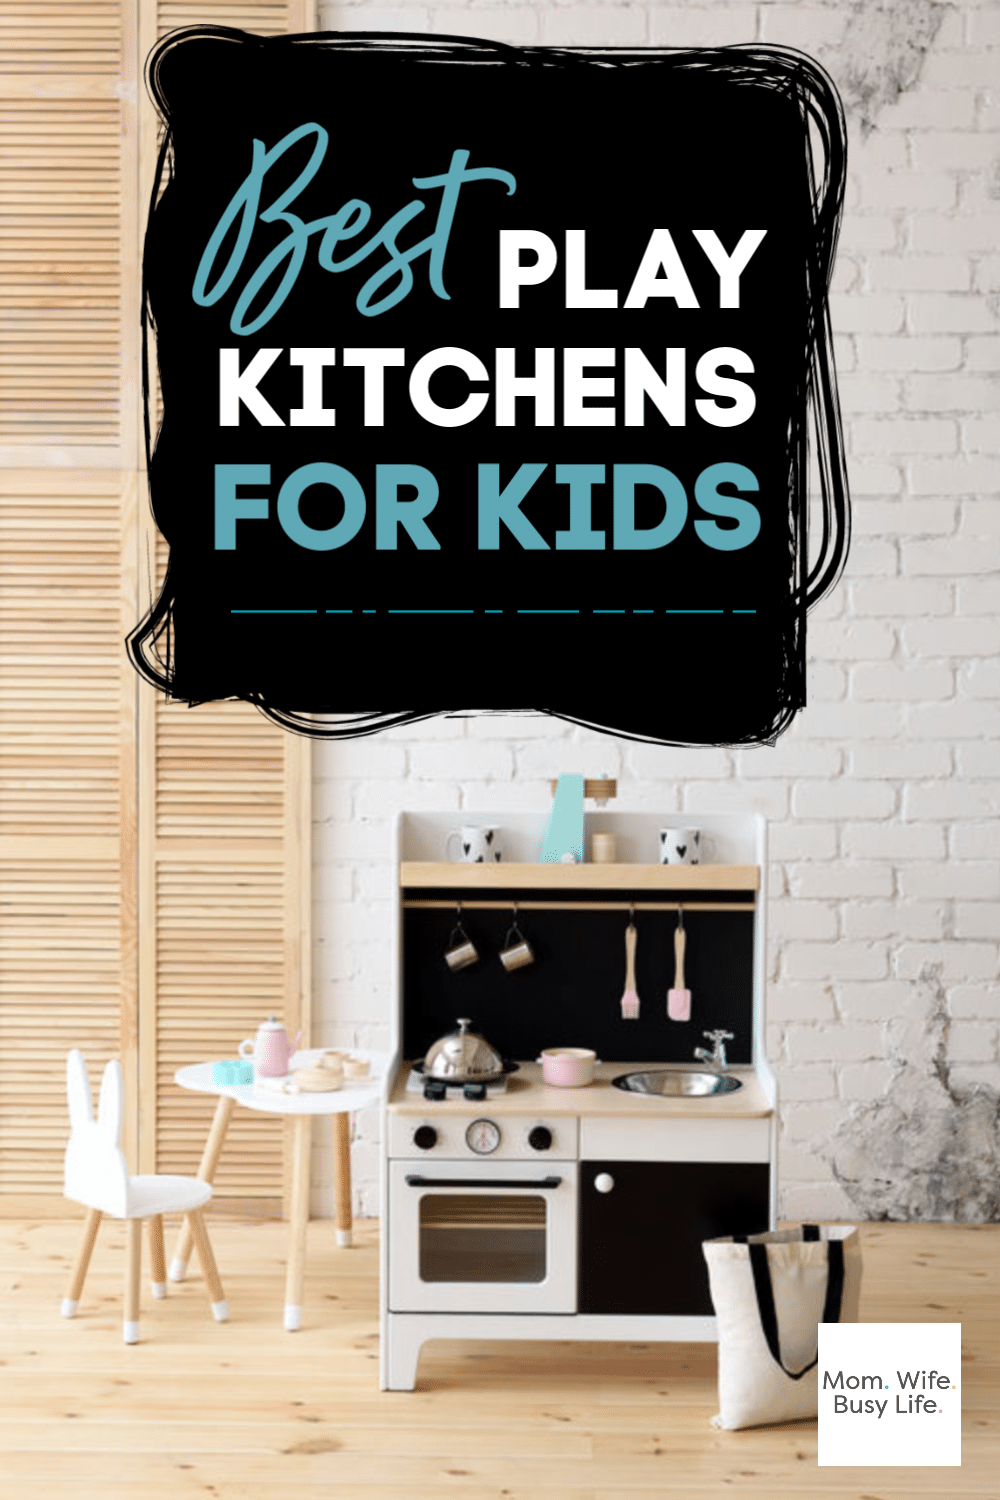 25+ Best Play Kitchens for Kids - Mom. Wife. Busy Life.